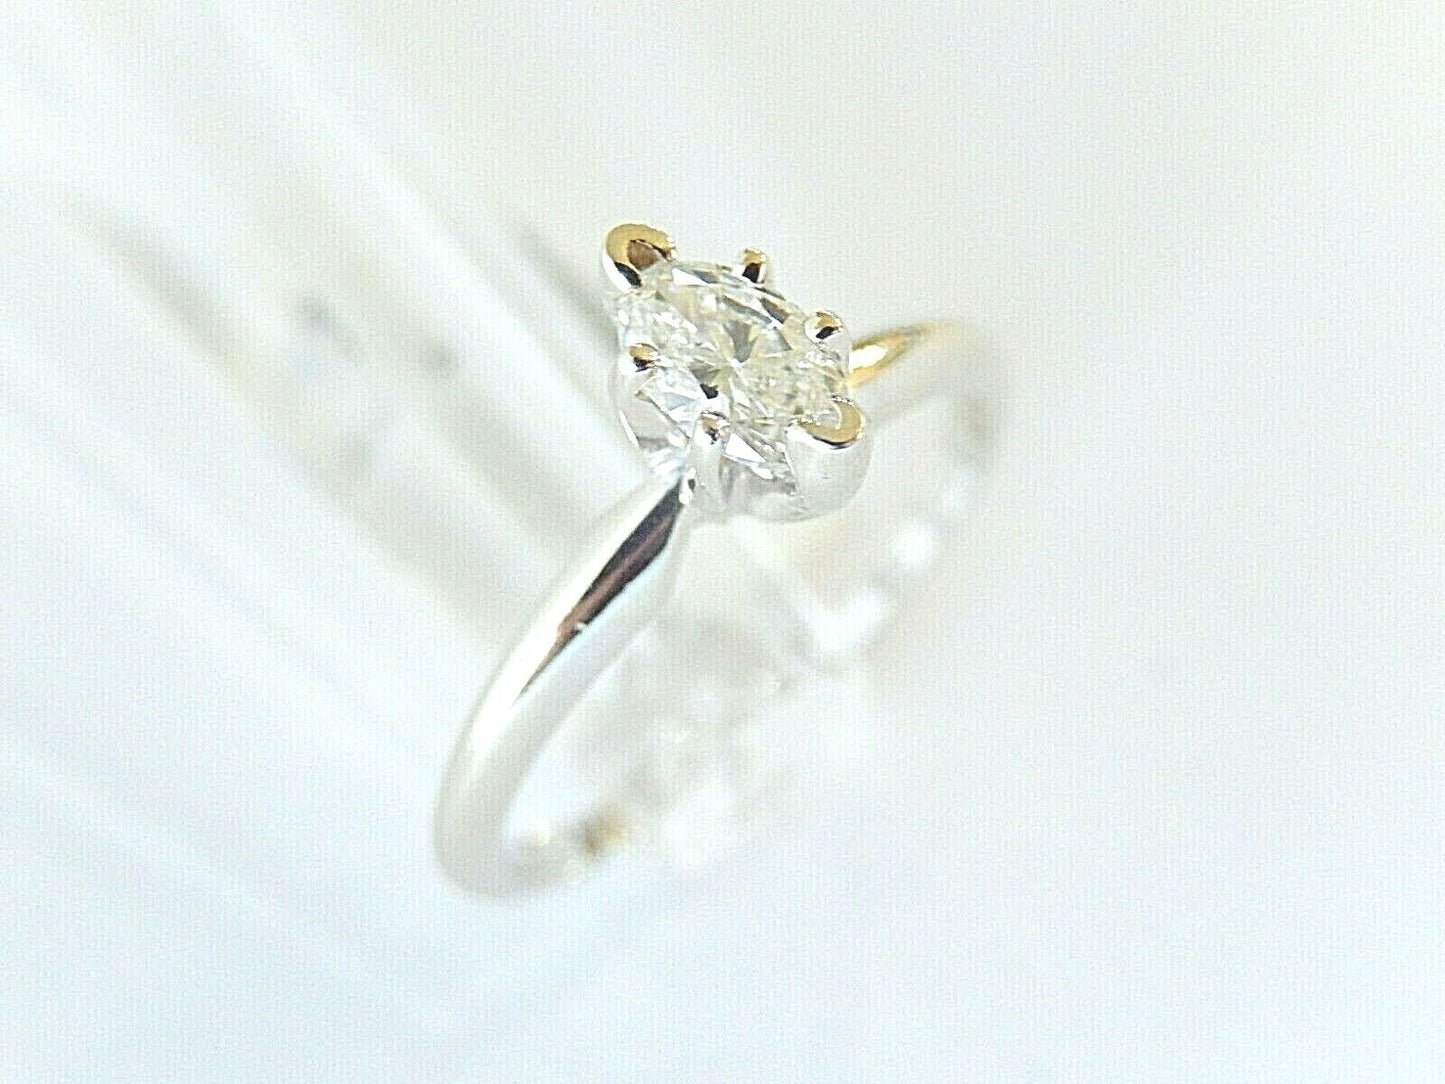 1/4 Ct Marquise Cut Natural VS Diamond 14K White Gold Solitaire Engagement Ring